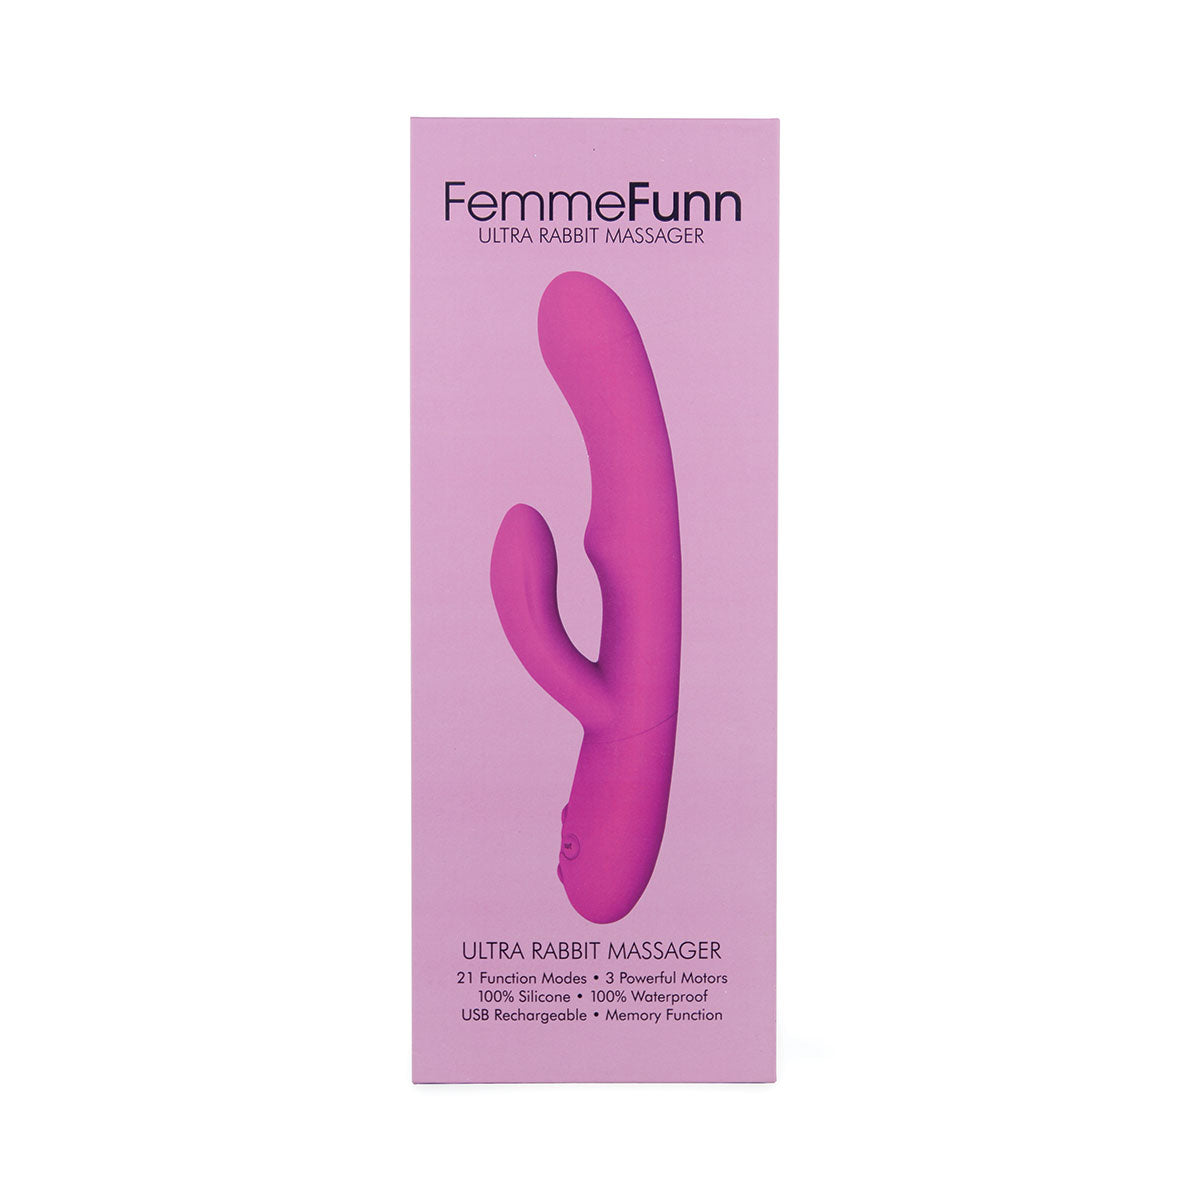 Femme Funn Ultra Rabbit - Pink Intimates Adult Boutique